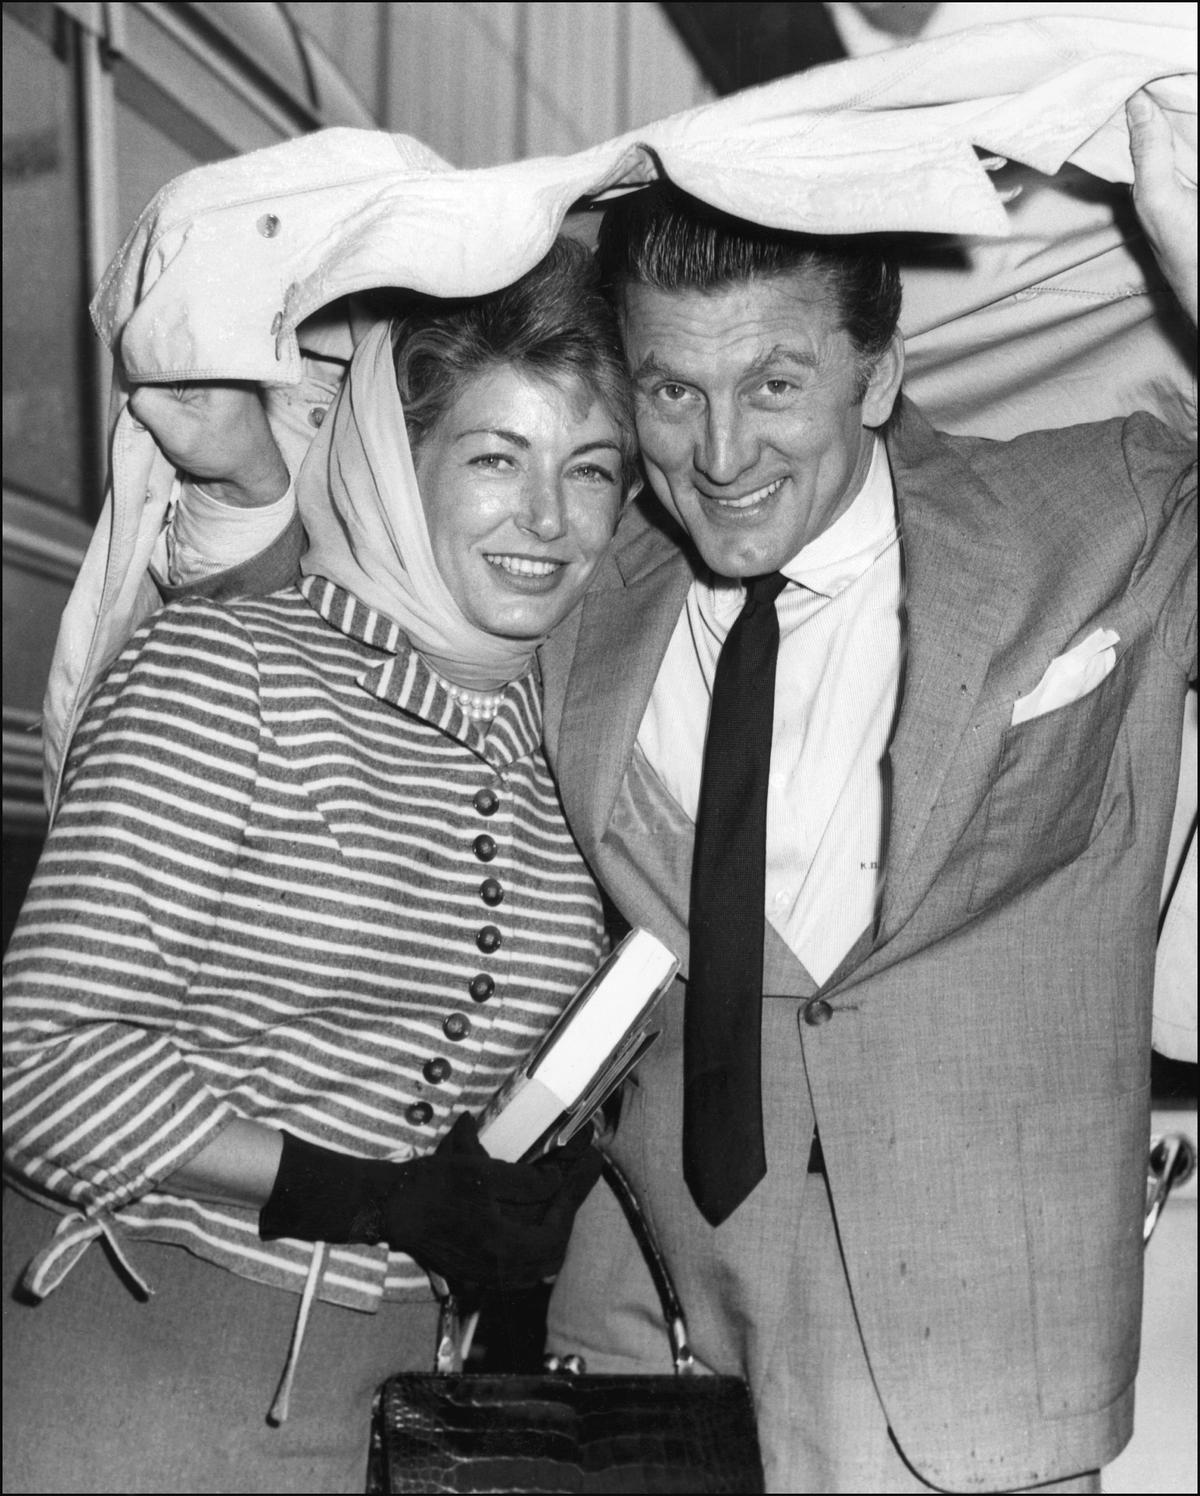 Douglas and his wife, Anne, pose for photographers at a London airport, England, on Aug. 18, 1958. (©Getty Images | <a href="https://www.gettyimages.com/detail/news-photo/film-actor-kirk-douglas-and-his-wife-anne-pose-for-news-photo/51499991">AFP/AFP</a>)